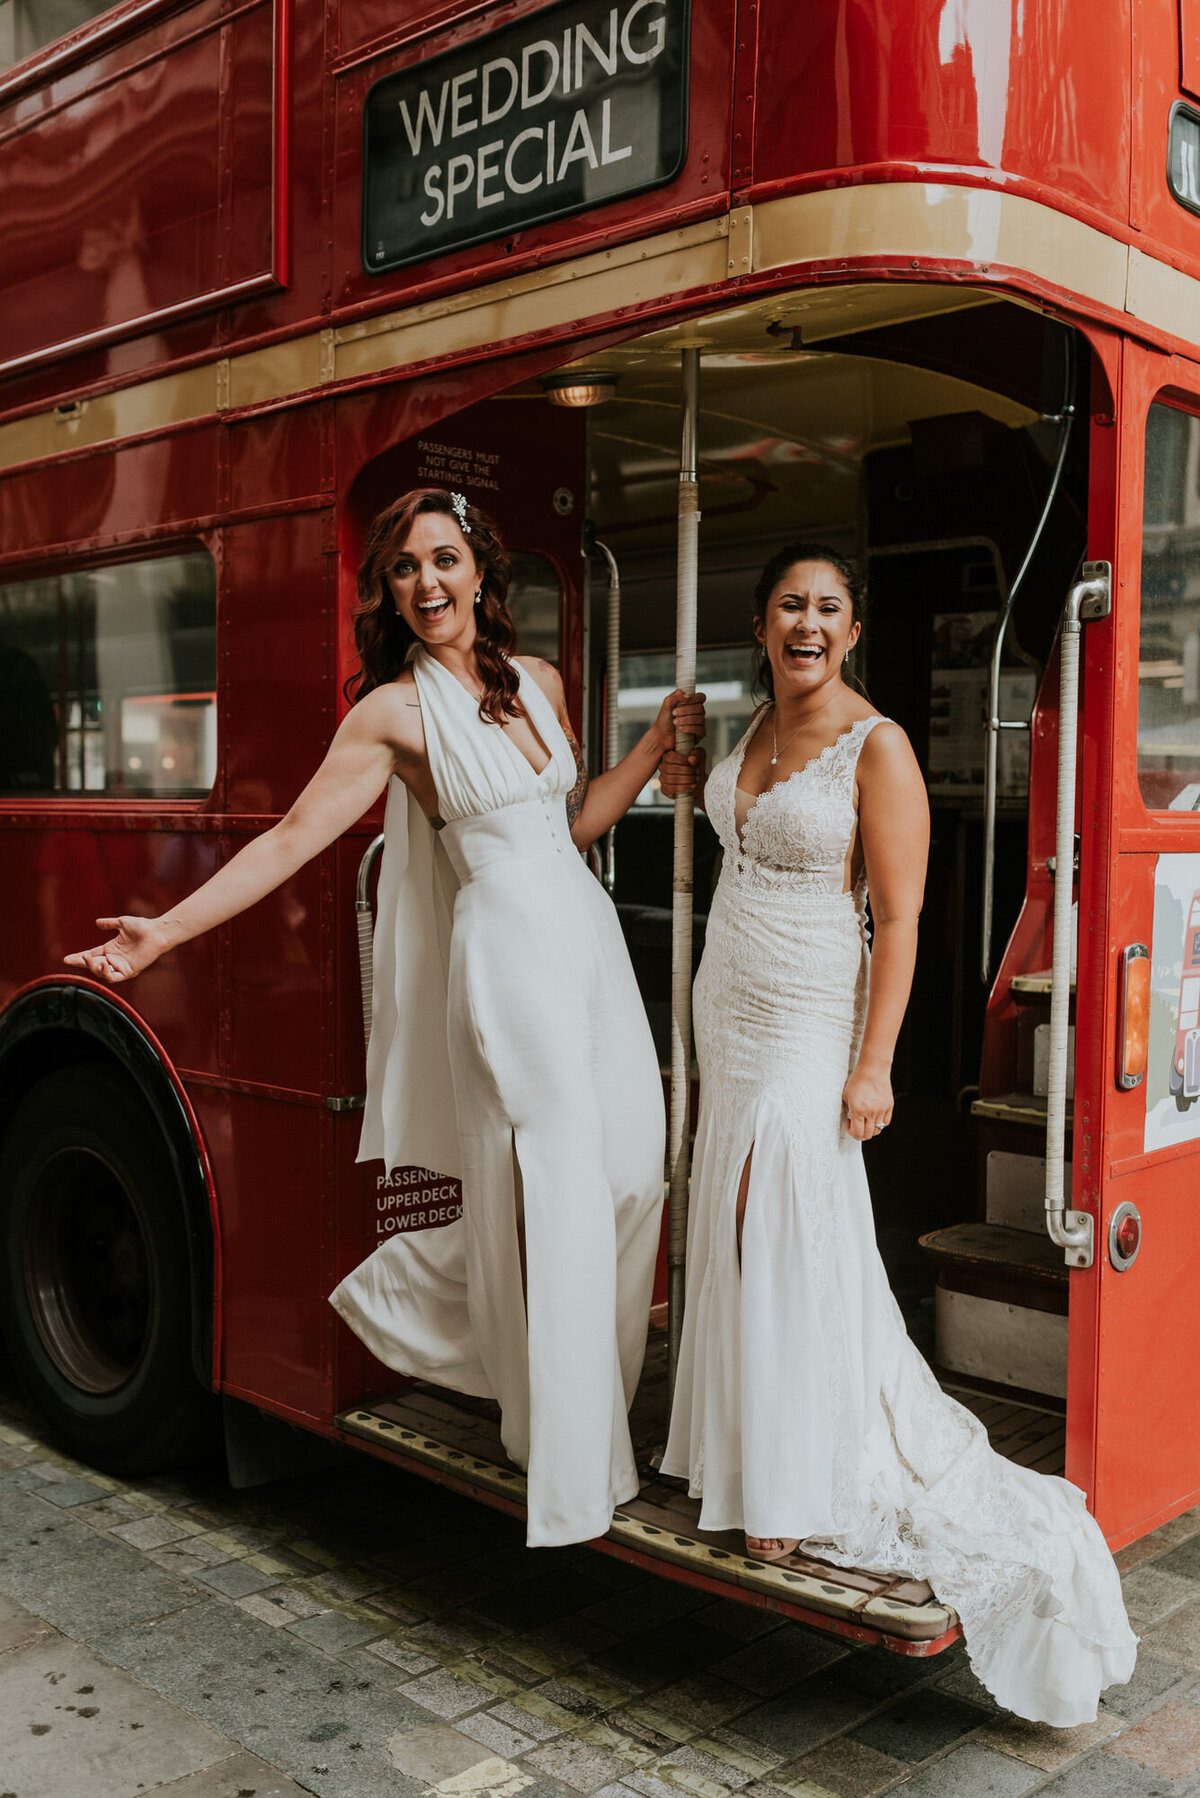 Bride and bride on a London bus